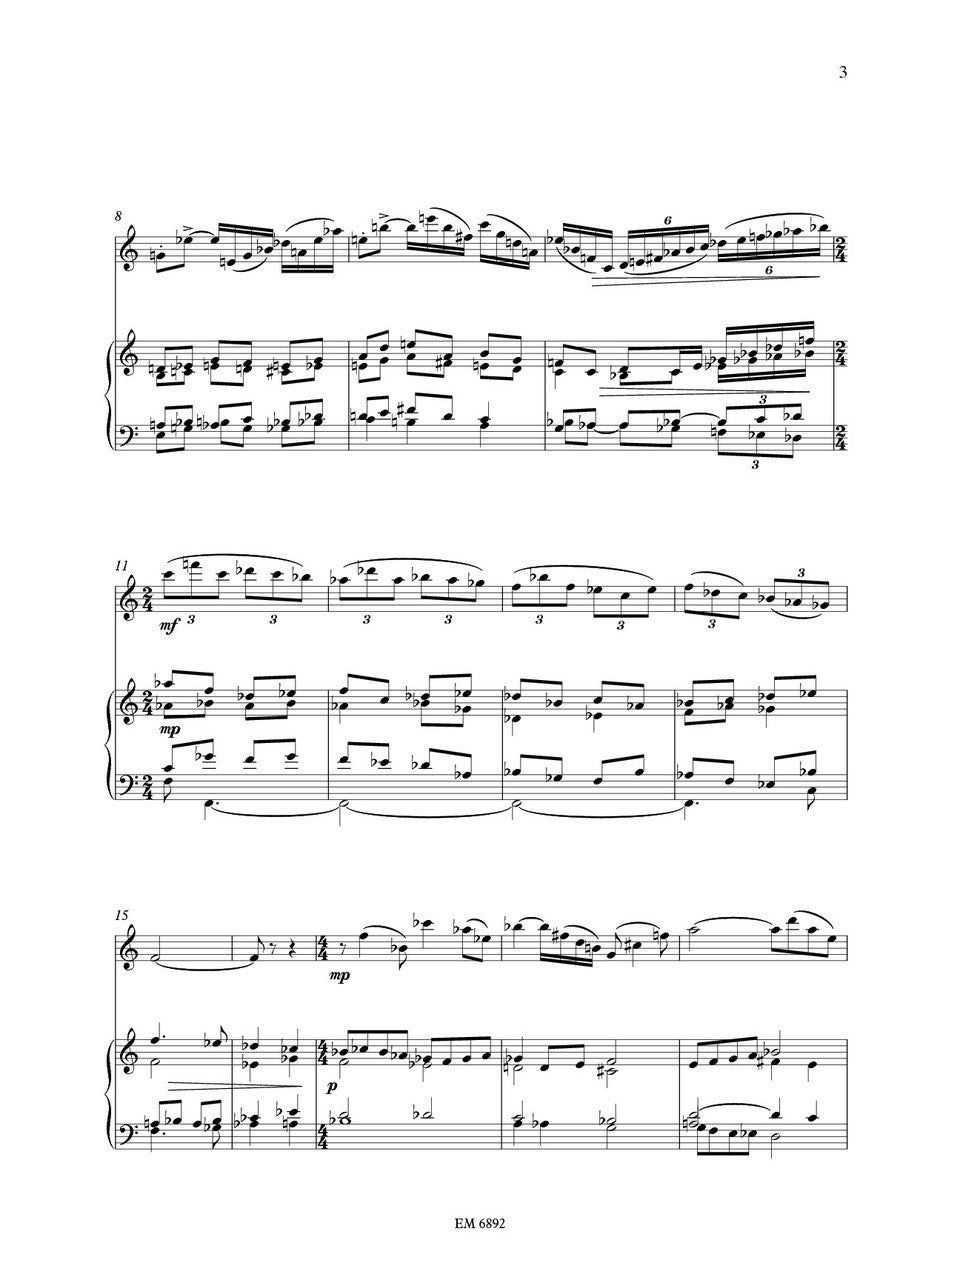 Laporte - Concertpiece for Clarinet and Strings (Piano Reduction)